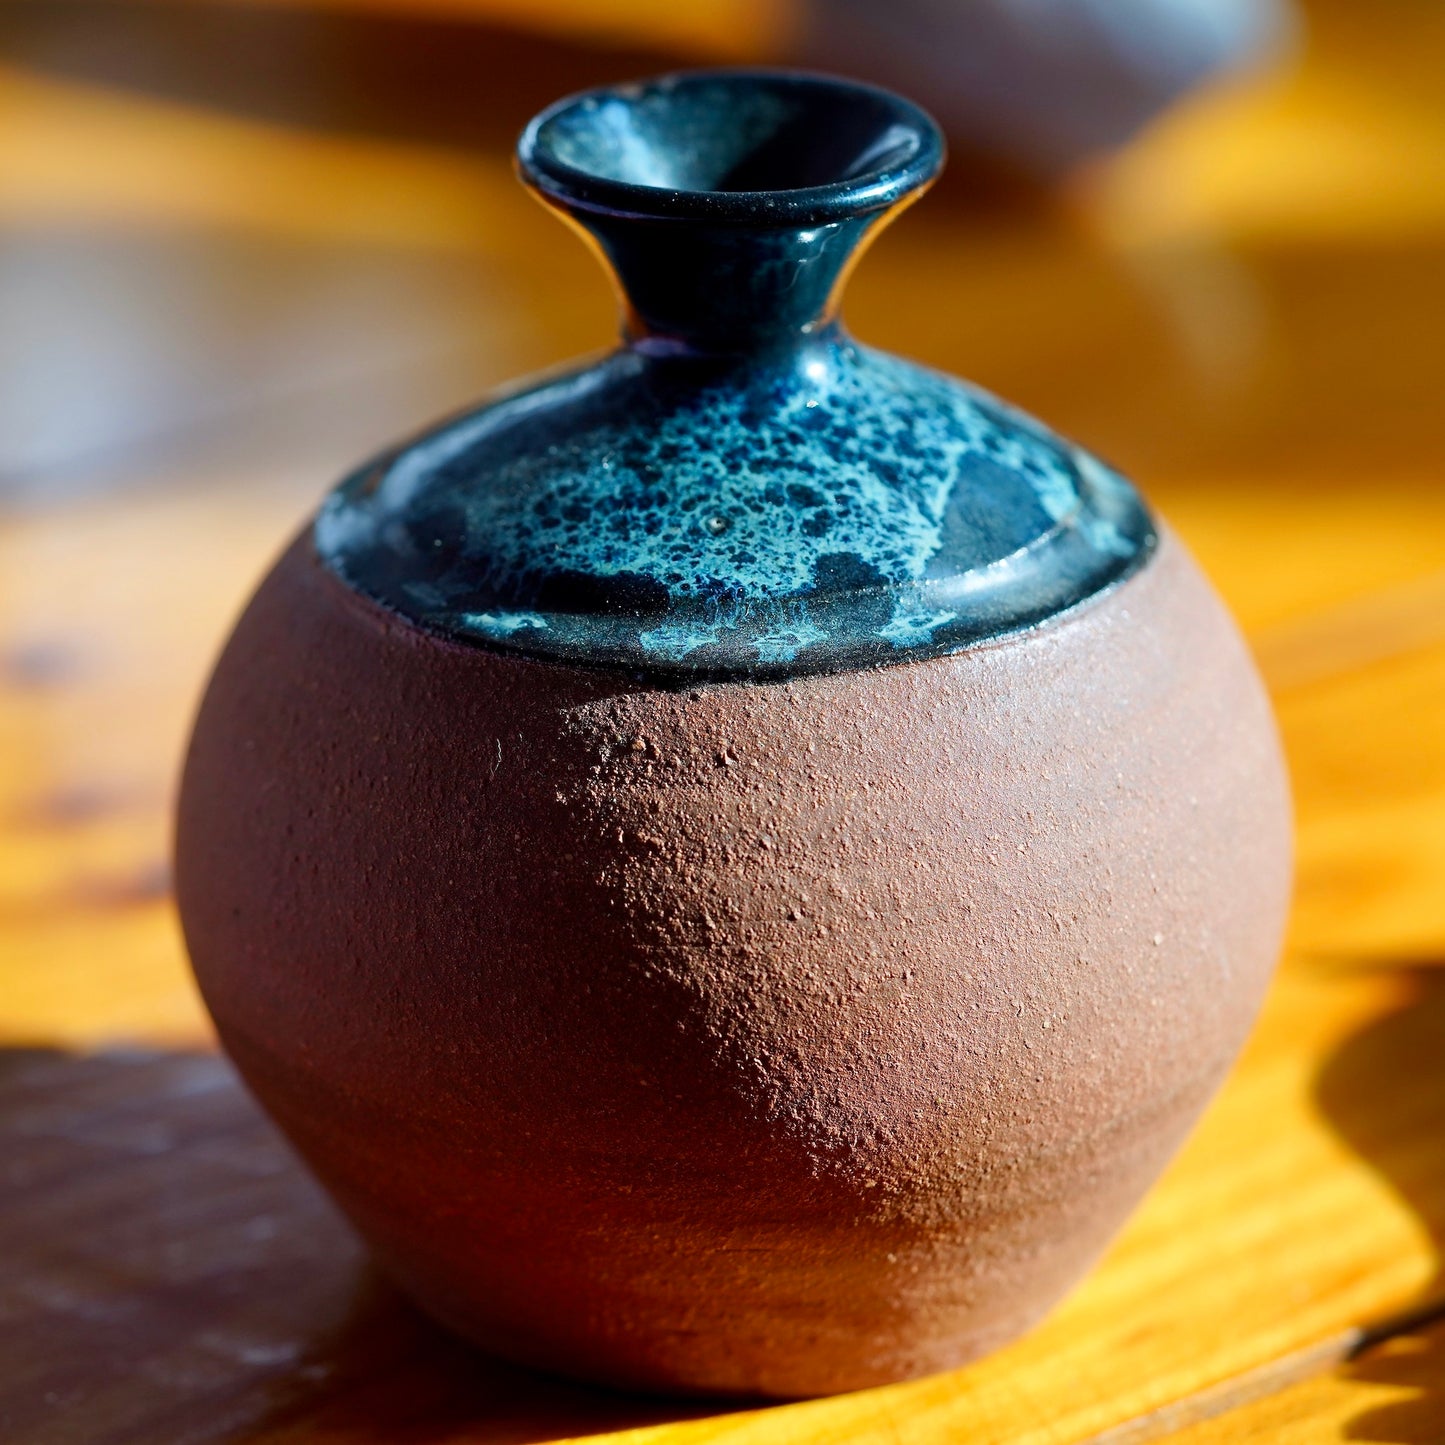 Handmade brown clay ceramic bud vase with black, blue and white nebula glaze on top, displayed on a light wood floor